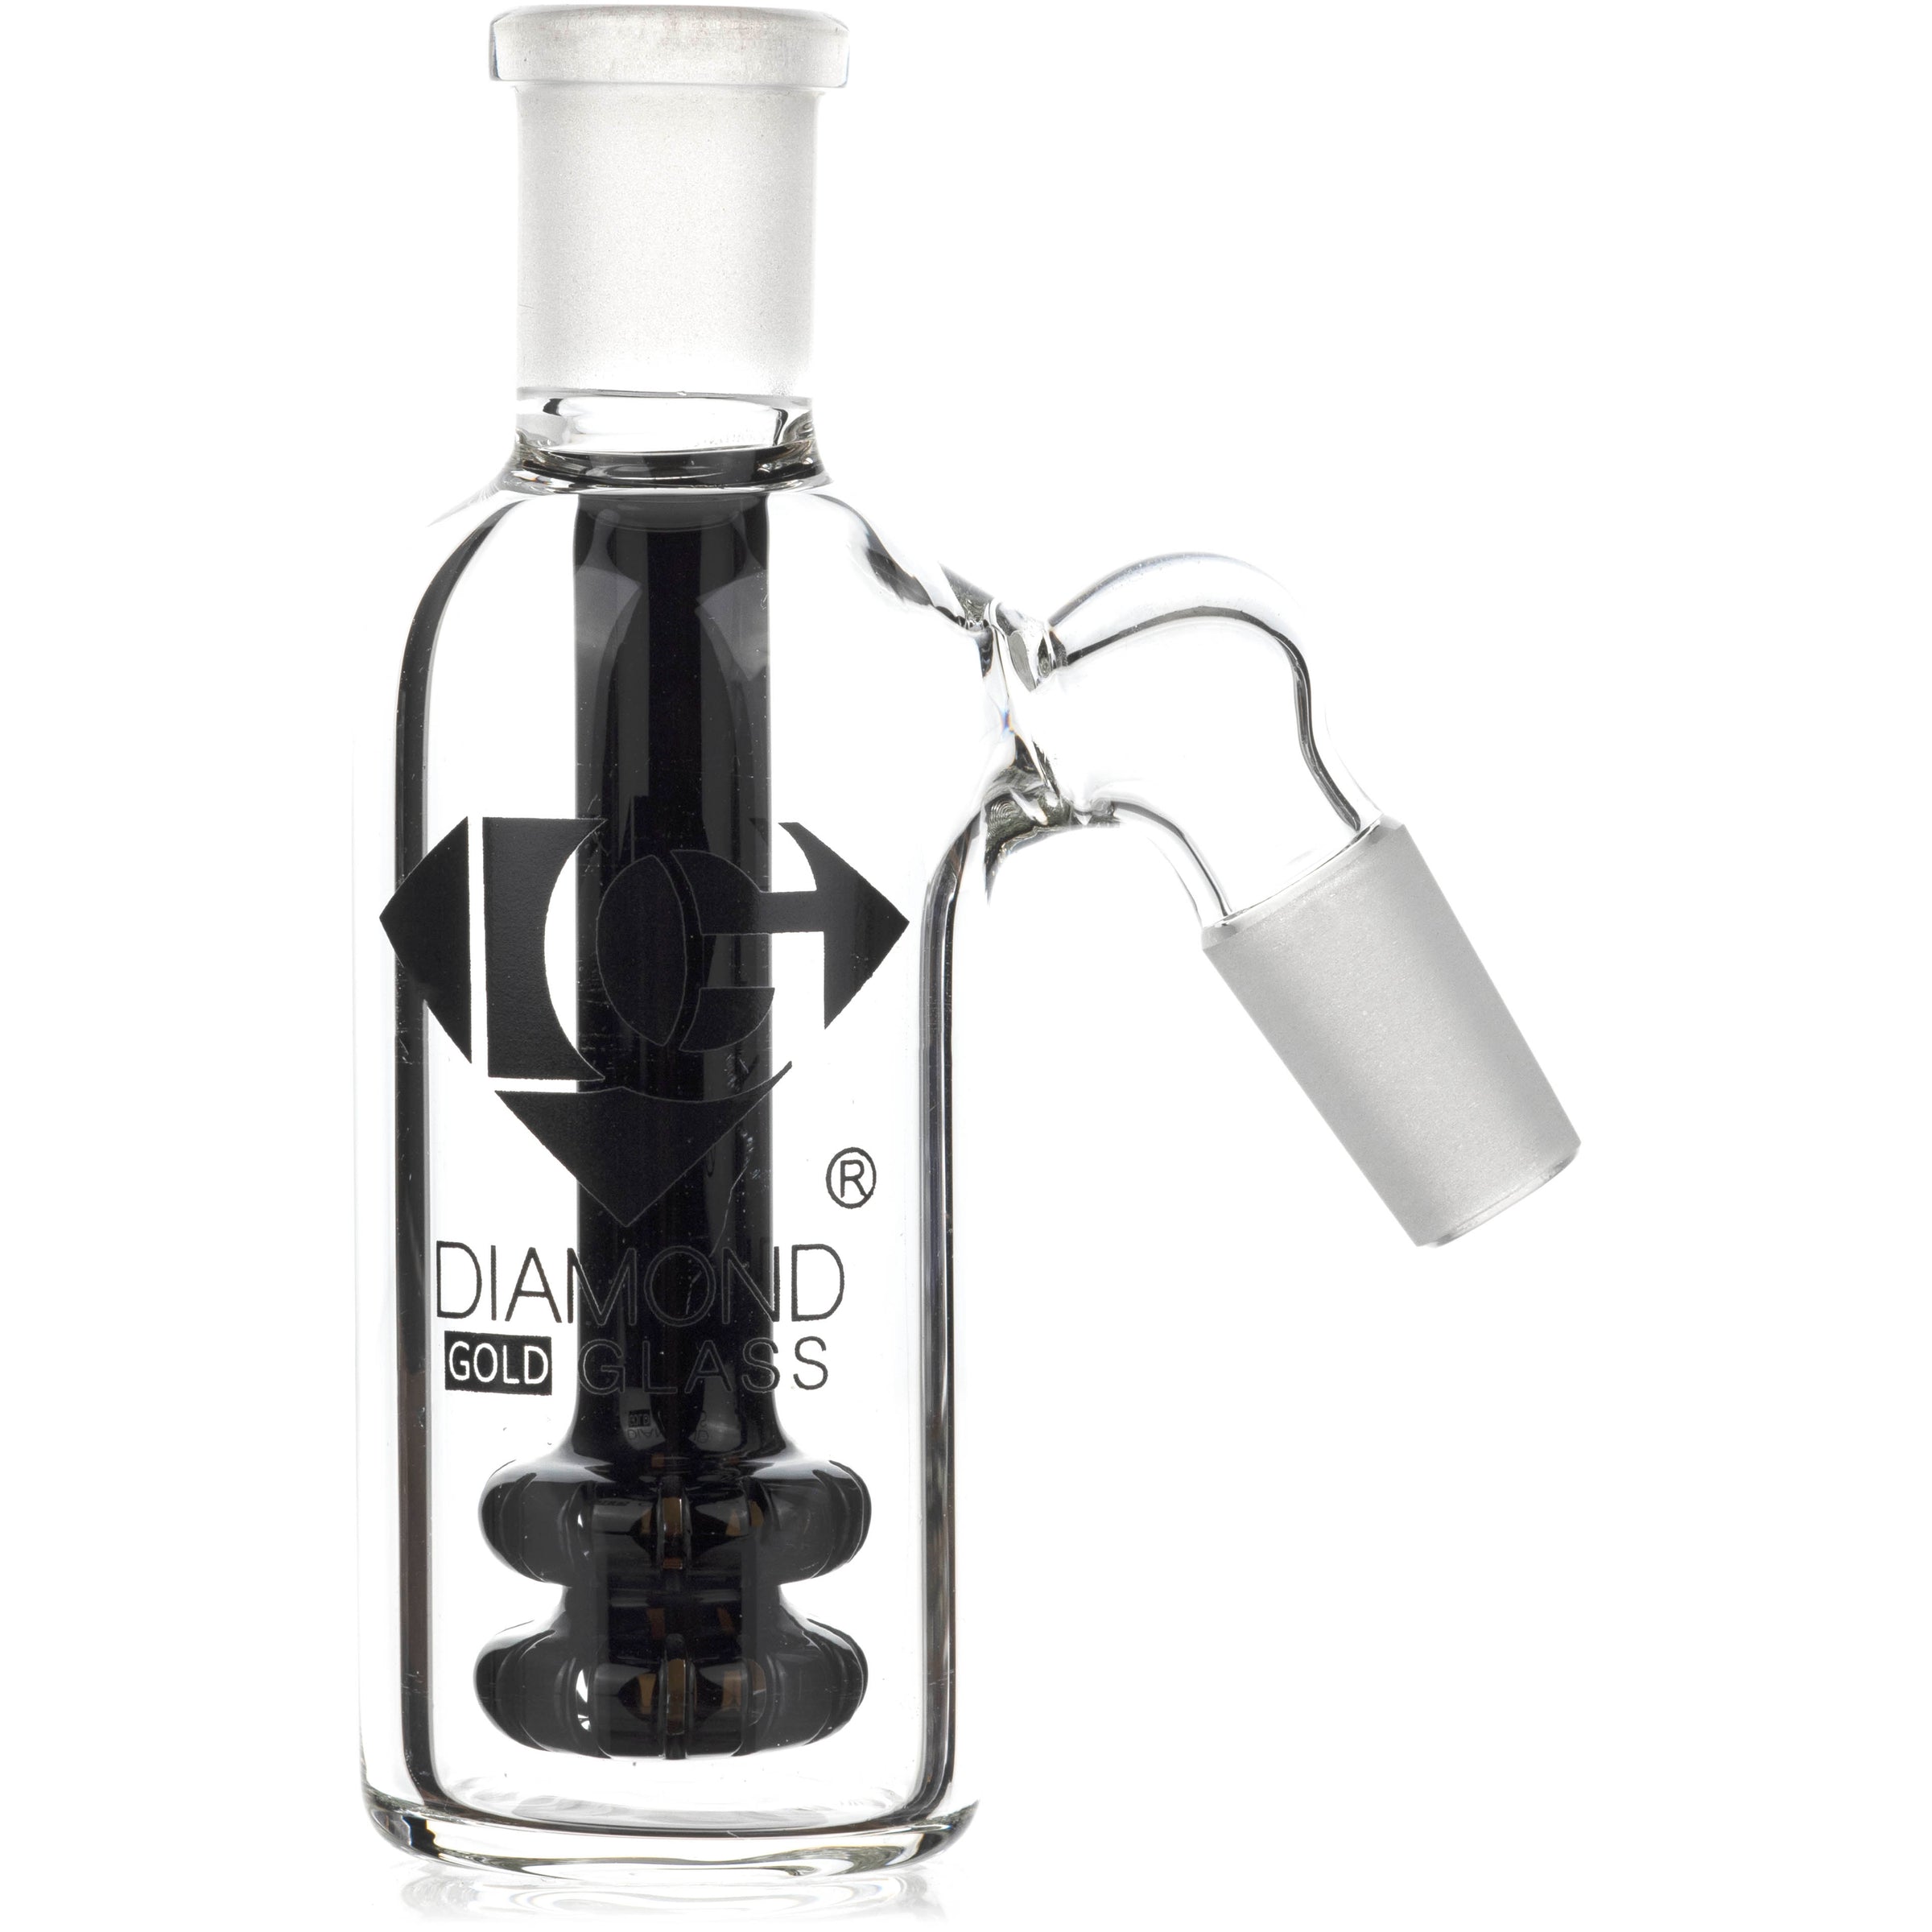 Ash Catcher w/ 14mm Joint, 45˚ Angle, Double Showerhead, by Diamond Glass